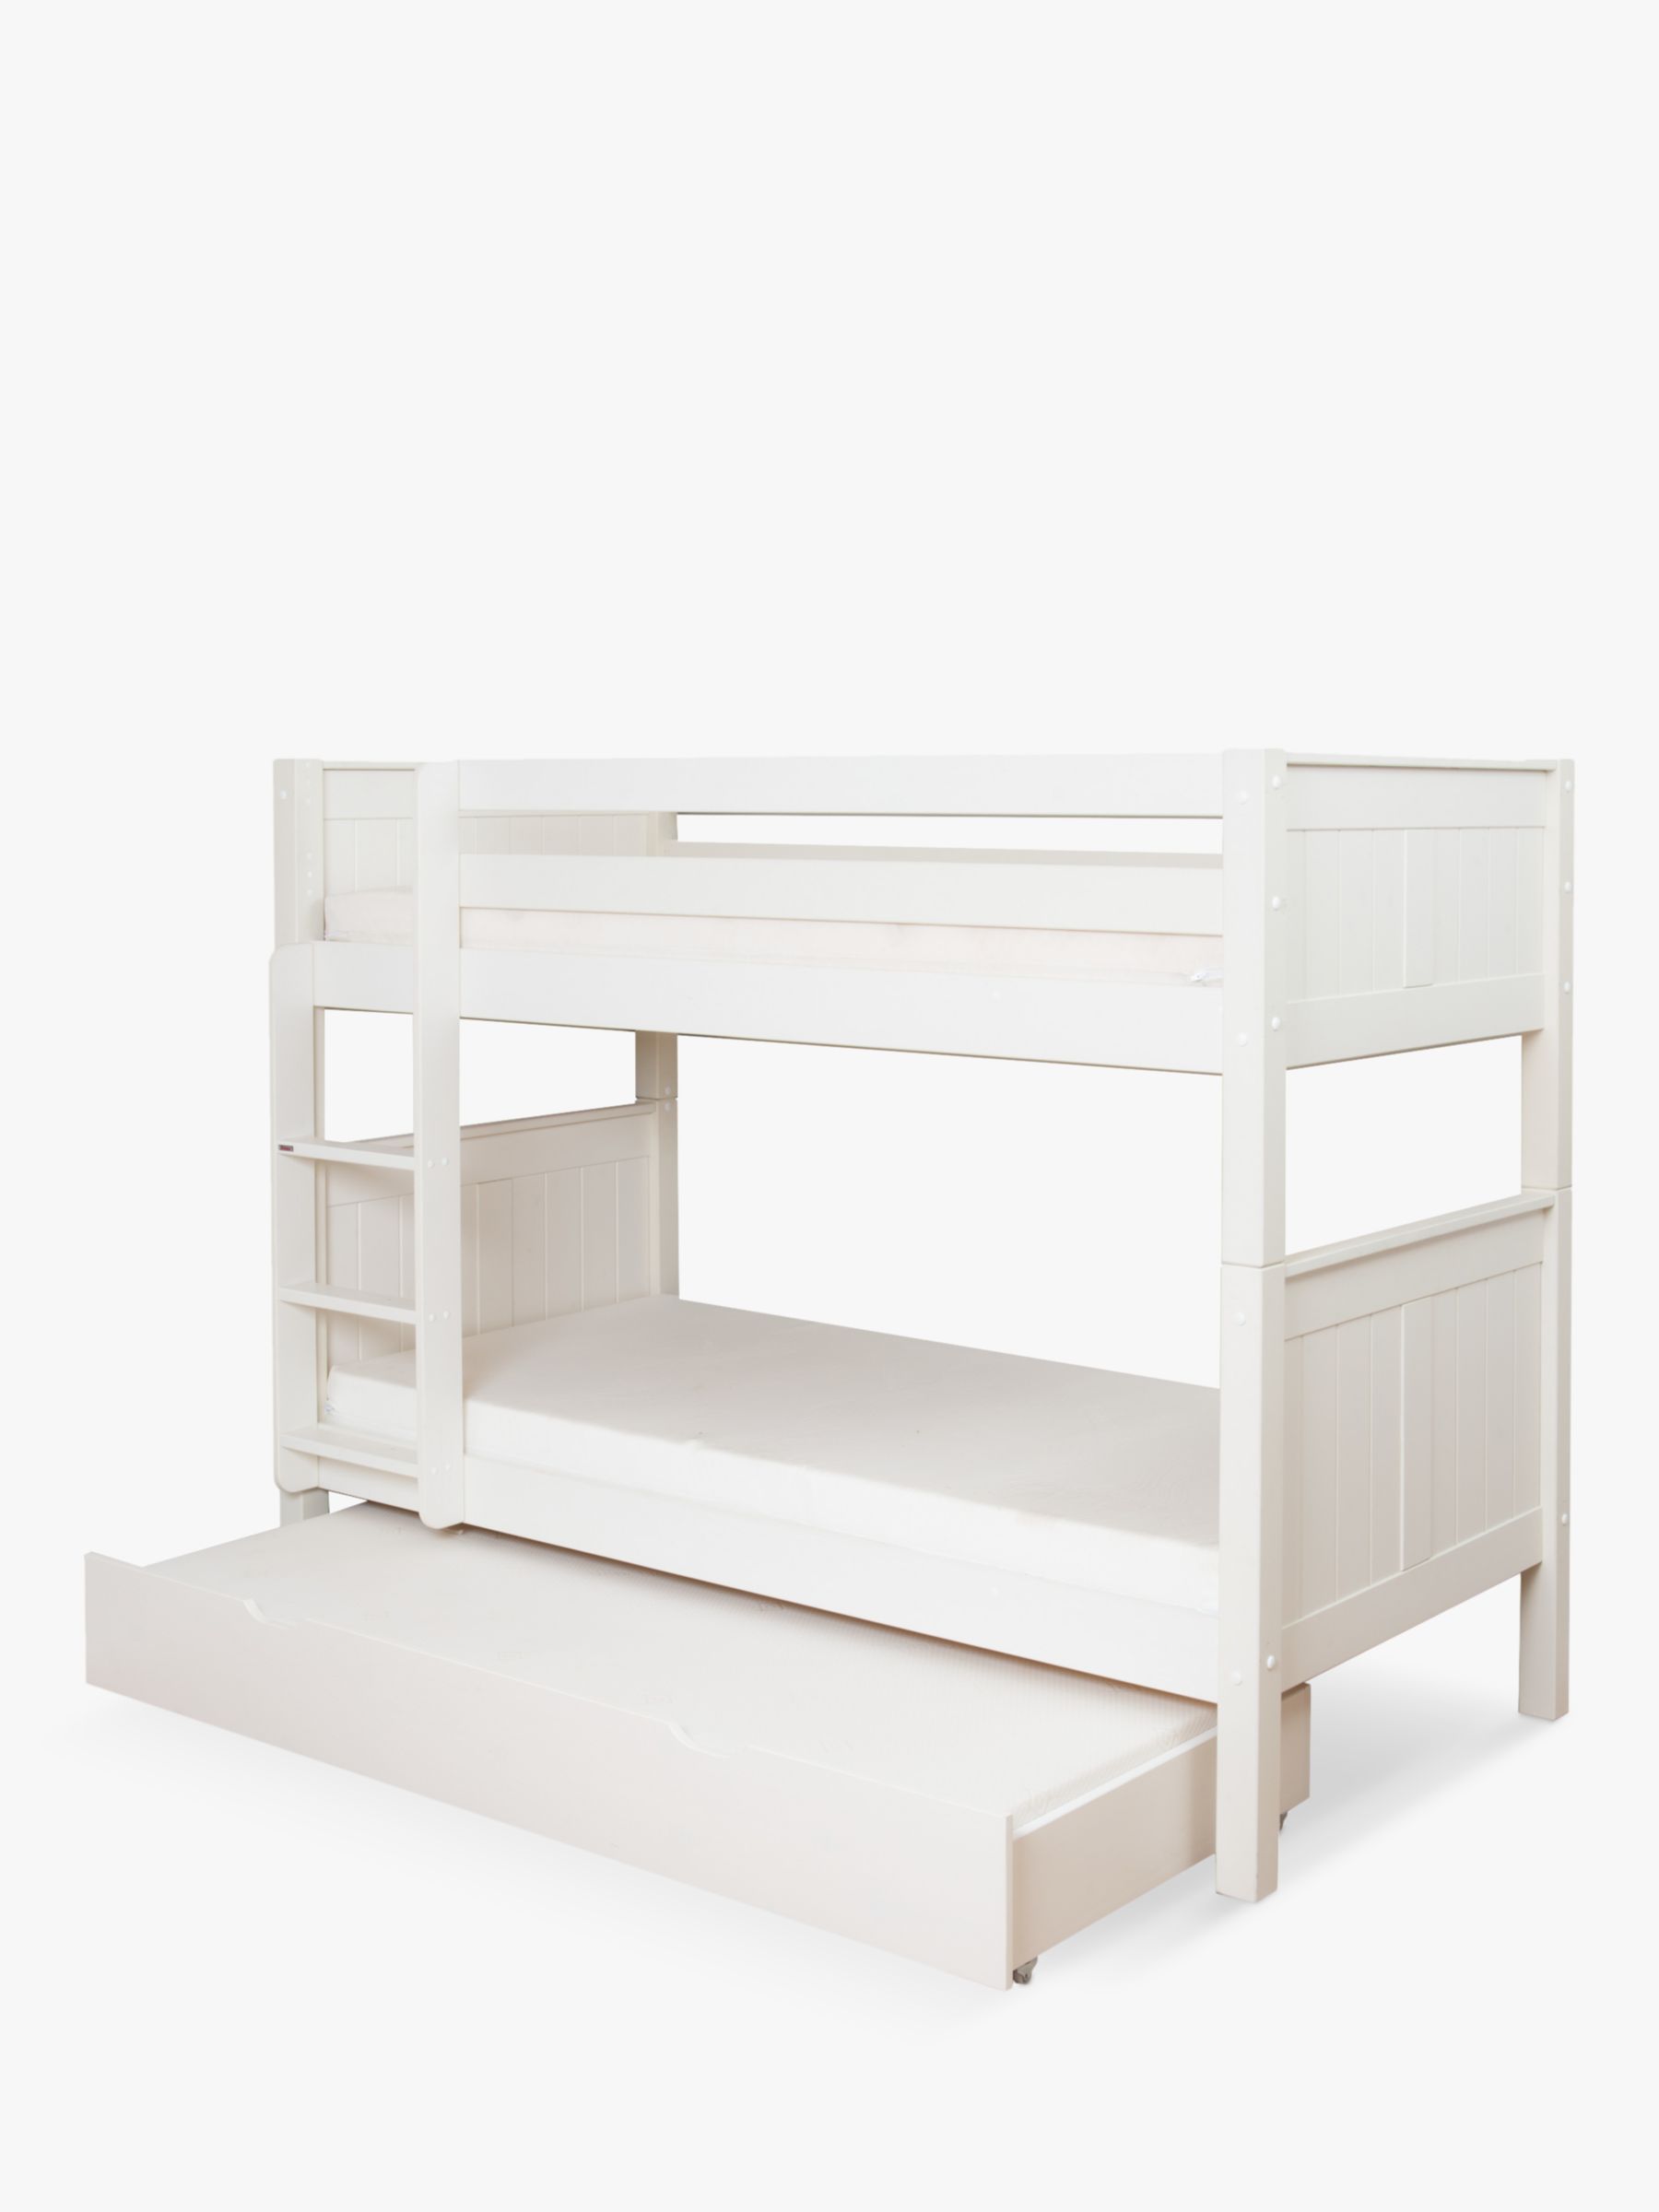 Stompa Classic Child Compliant Bunk Bed, Old School Bunk Beds